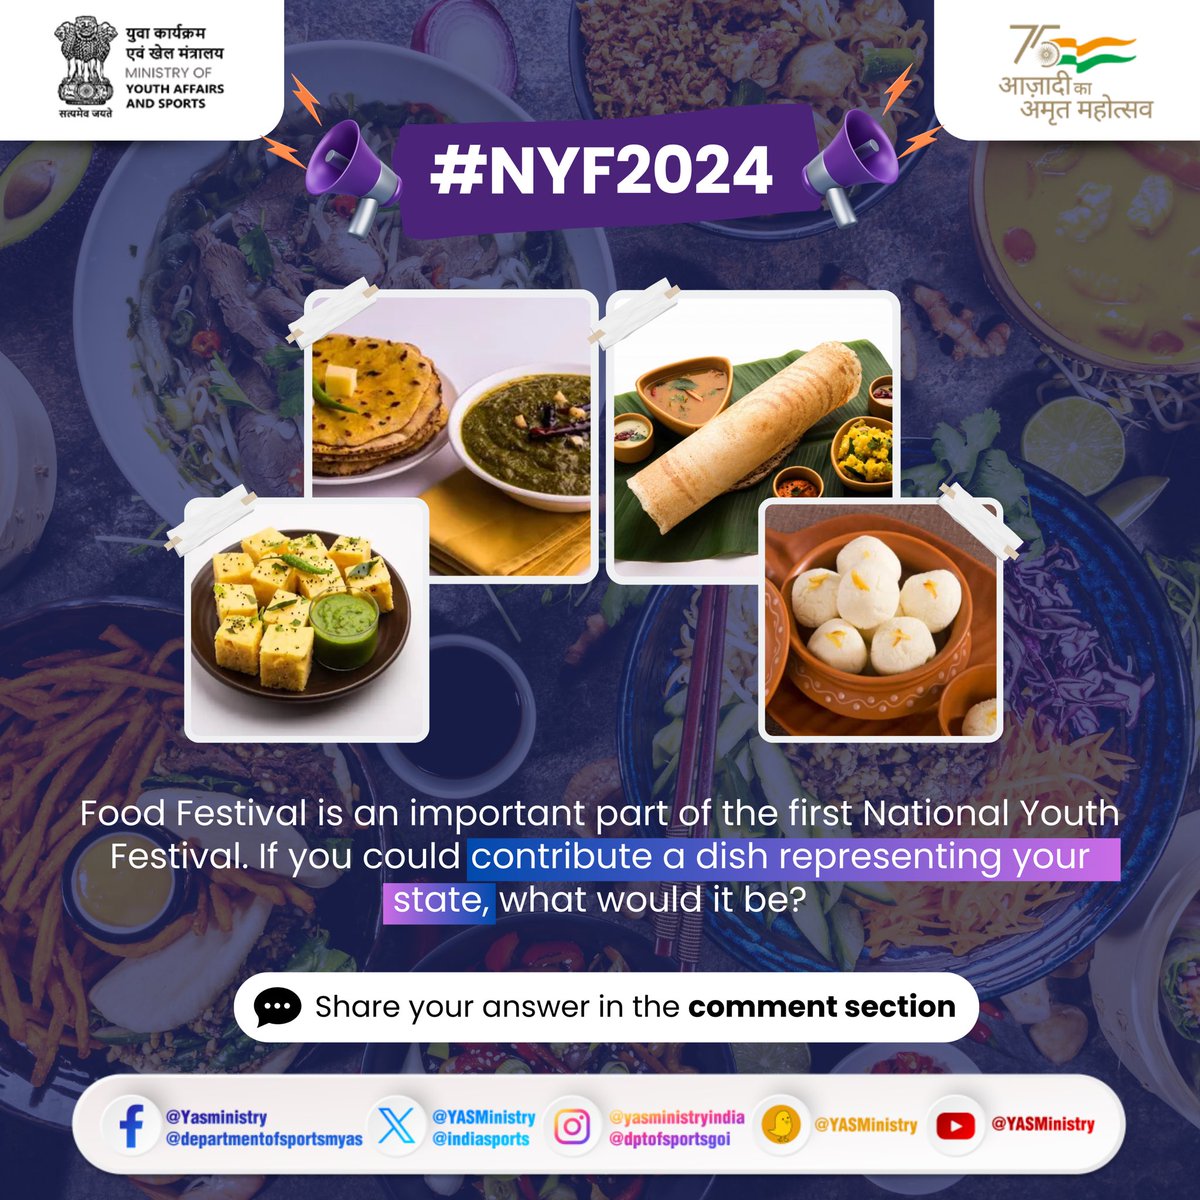 Share the taste of your state! 😋 If you could contribute a dish to the national youth festival, what would it be? Comment below and let's indulge in the diverse flavors that define us! 💬 #NationalYouthFestival2024 #NYF2024 #NationalYouthFestival #NYF